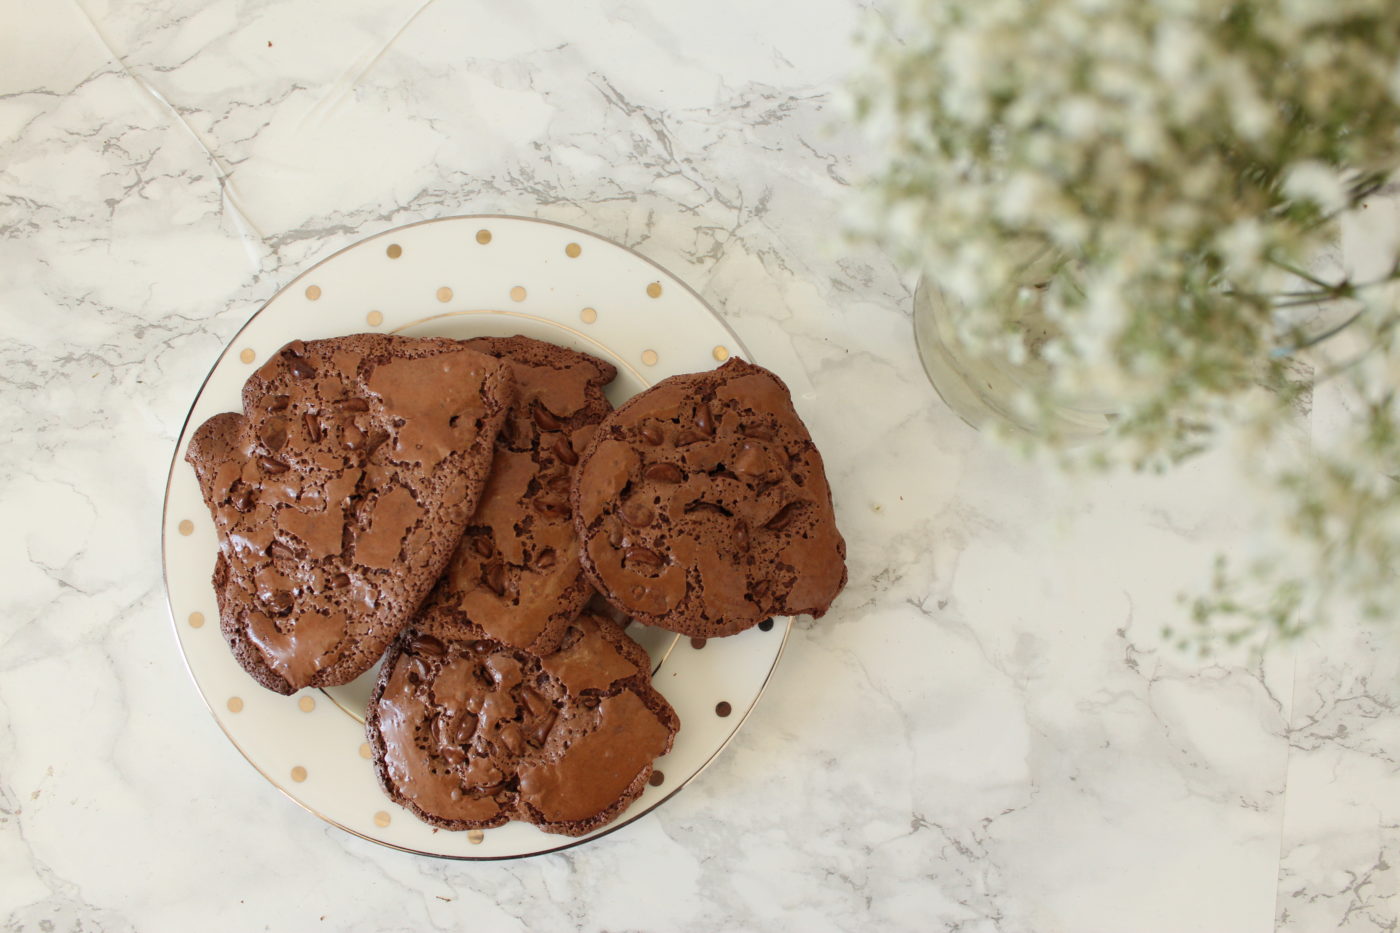 Flourless chocolate cookies could be one of your favorite desserts - just don't over do it with the egg whites.